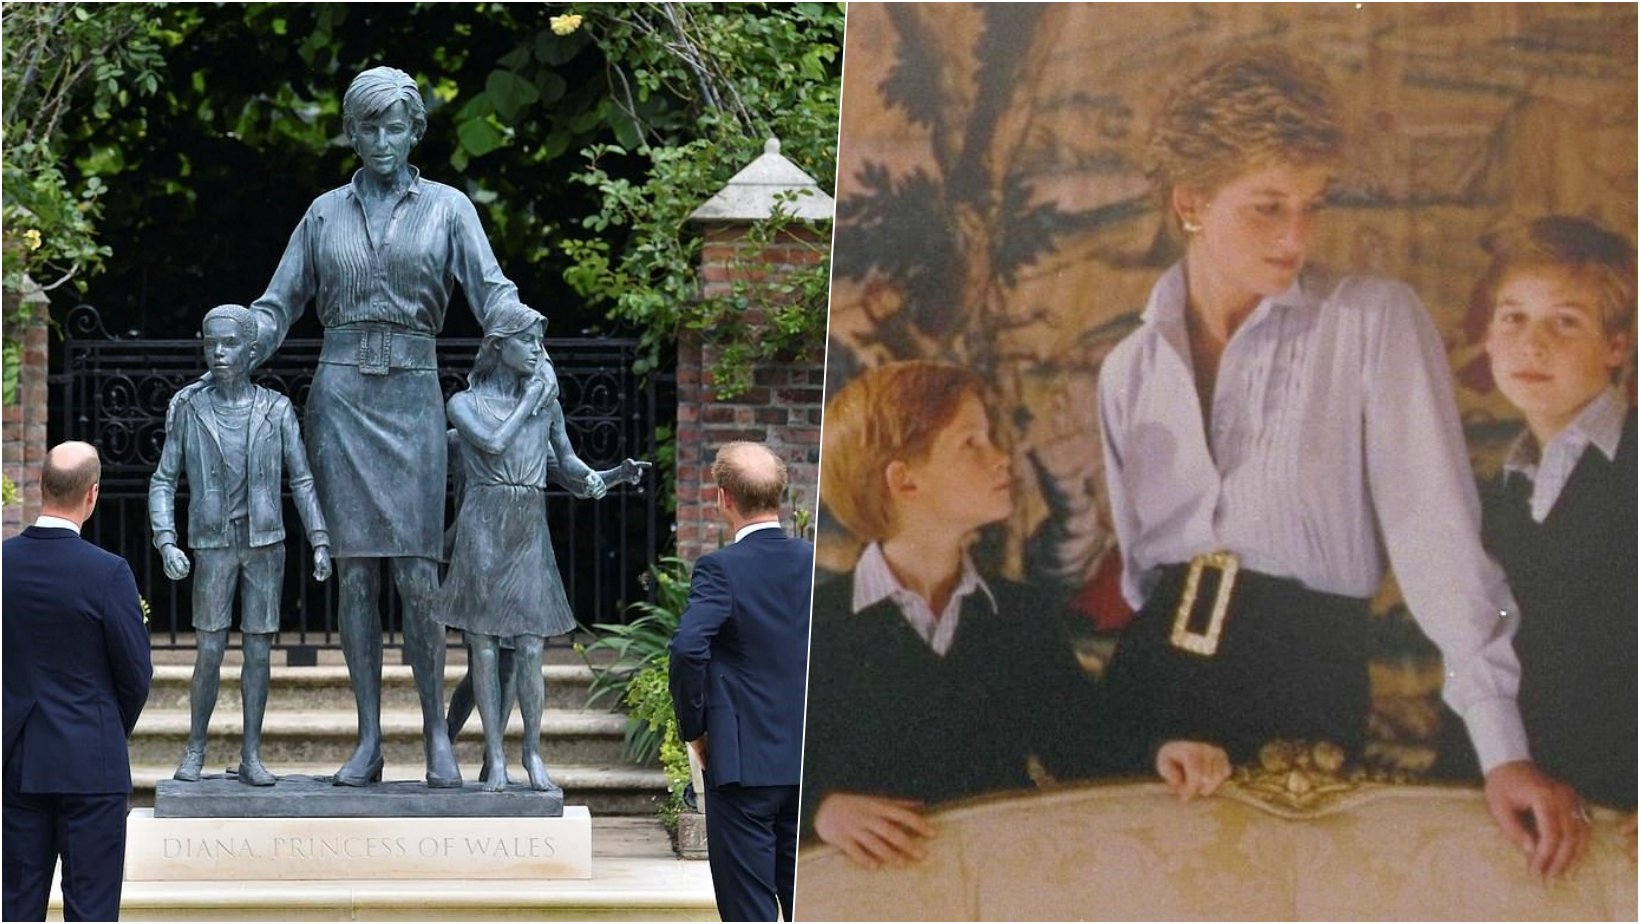 6 facebook cover 2.png?resize=412,232 - Princess Diana Was Honored Through A Statue Inspired By A 1993 Christmas Card